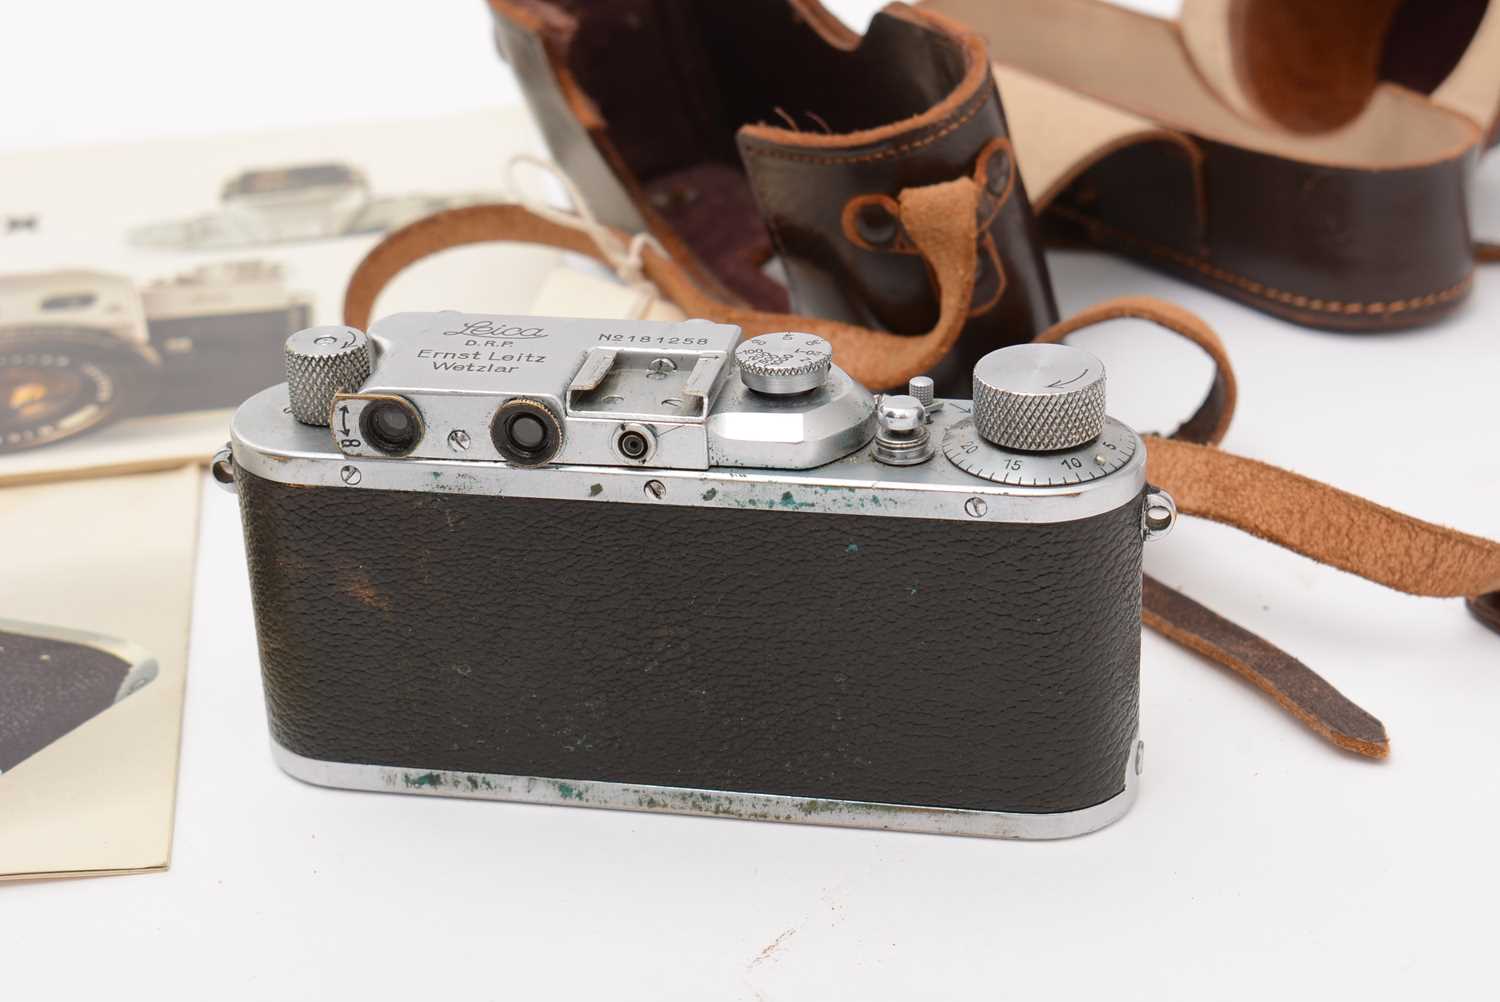 A Leica IIIa rangefinder camera; and accessories - Image 4 of 6